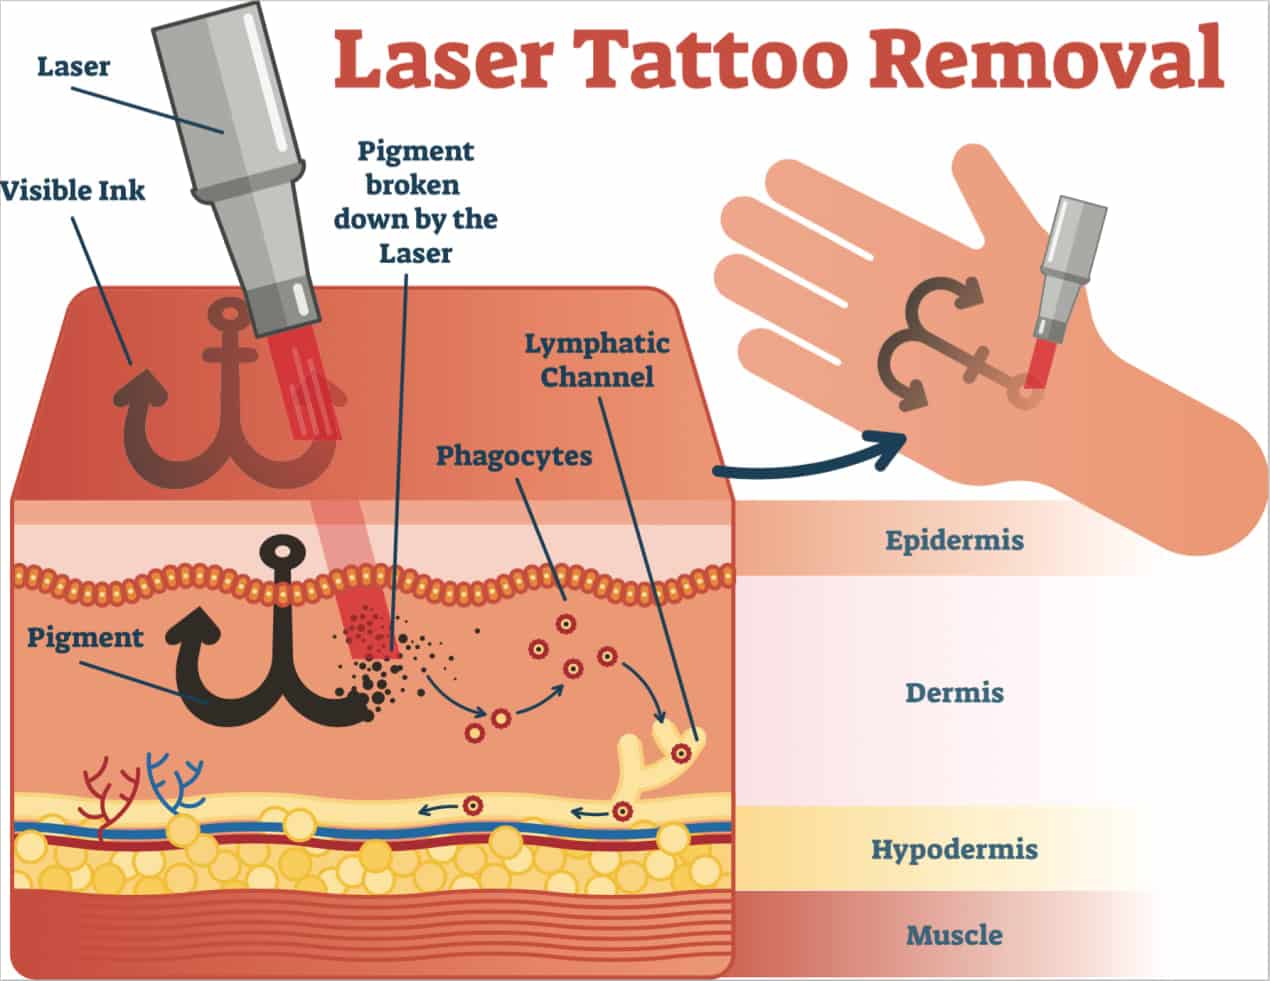 Tattoo Removal Laser in Singapore